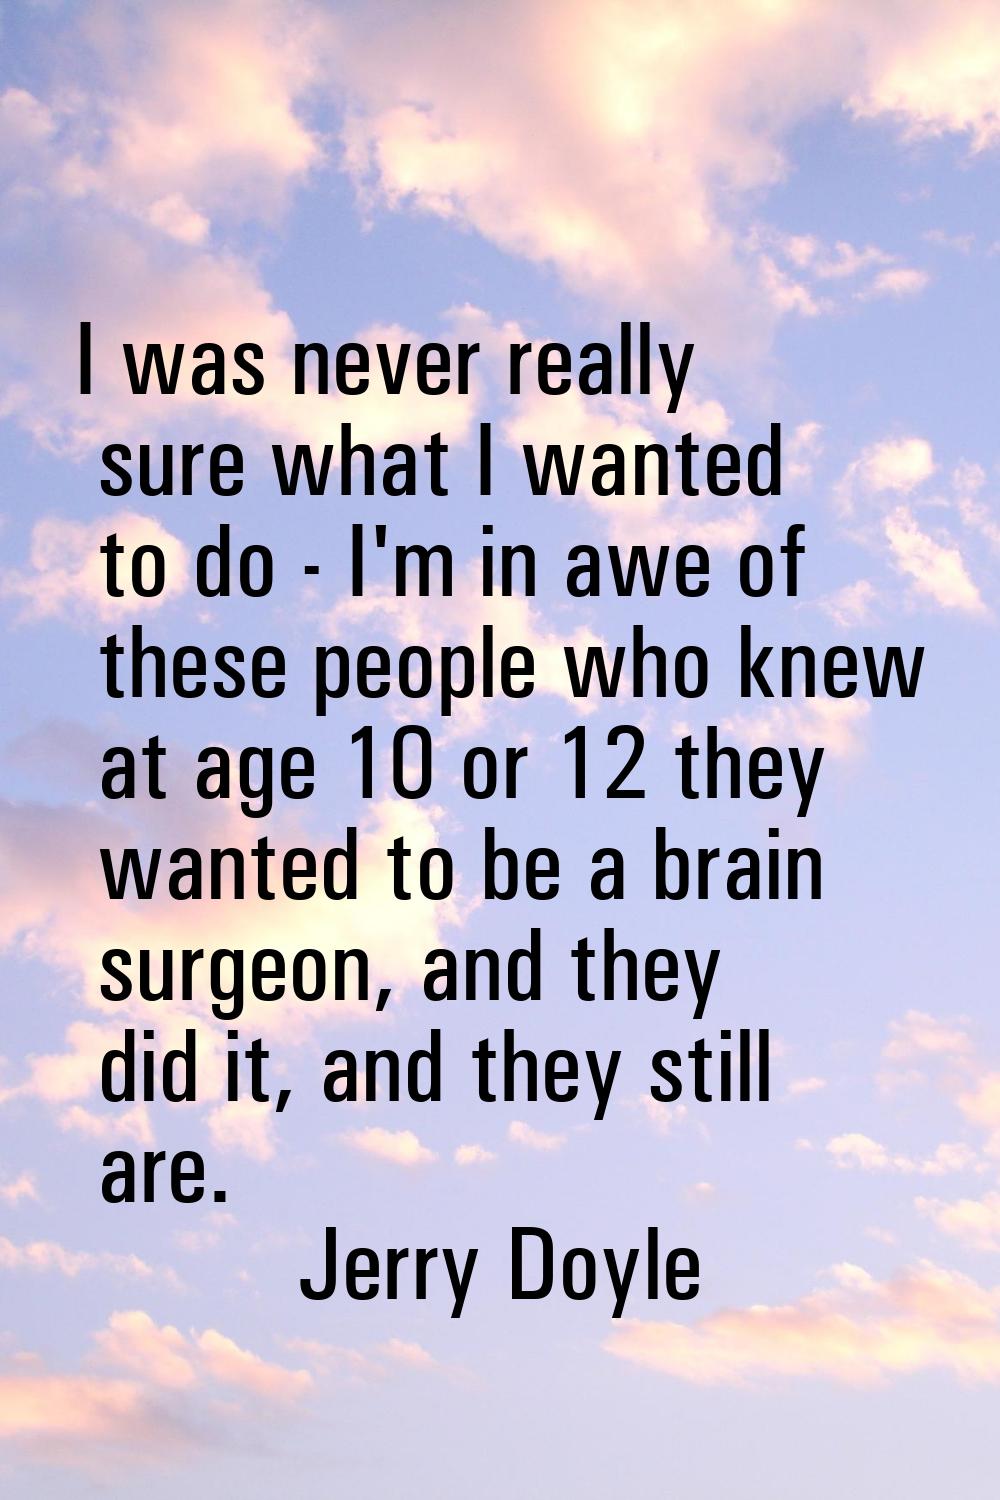 I was never really sure what I wanted to do - I'm in awe of these people who knew at age 10 or 12 t